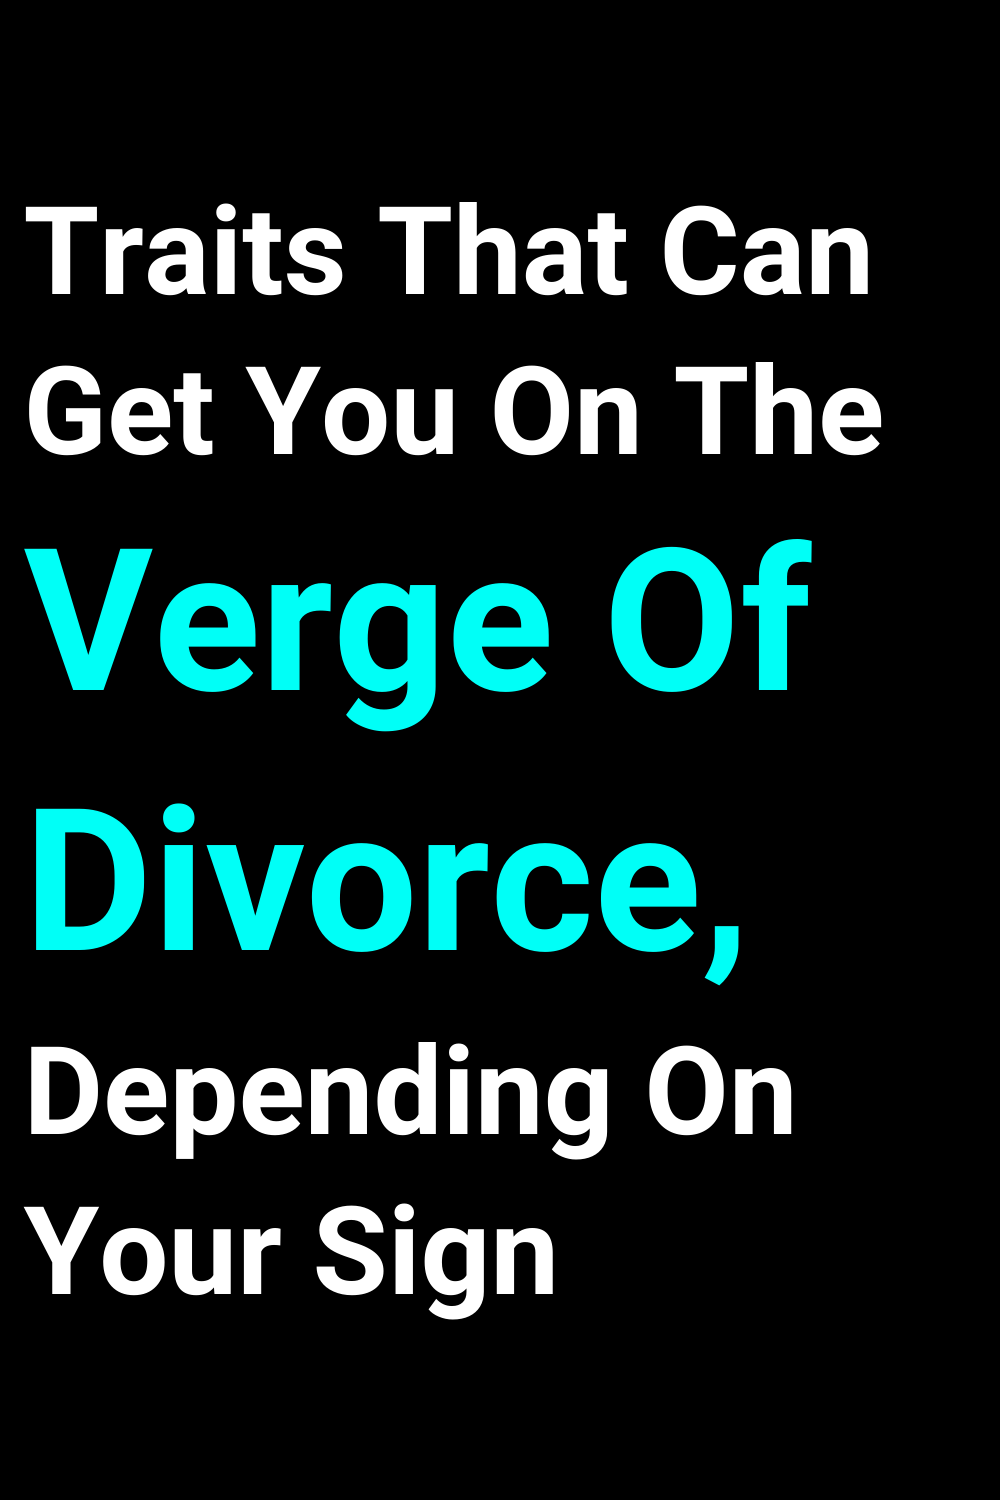 Traits That Can Get You On The Verge Of Divorce, Depending On Your Sign